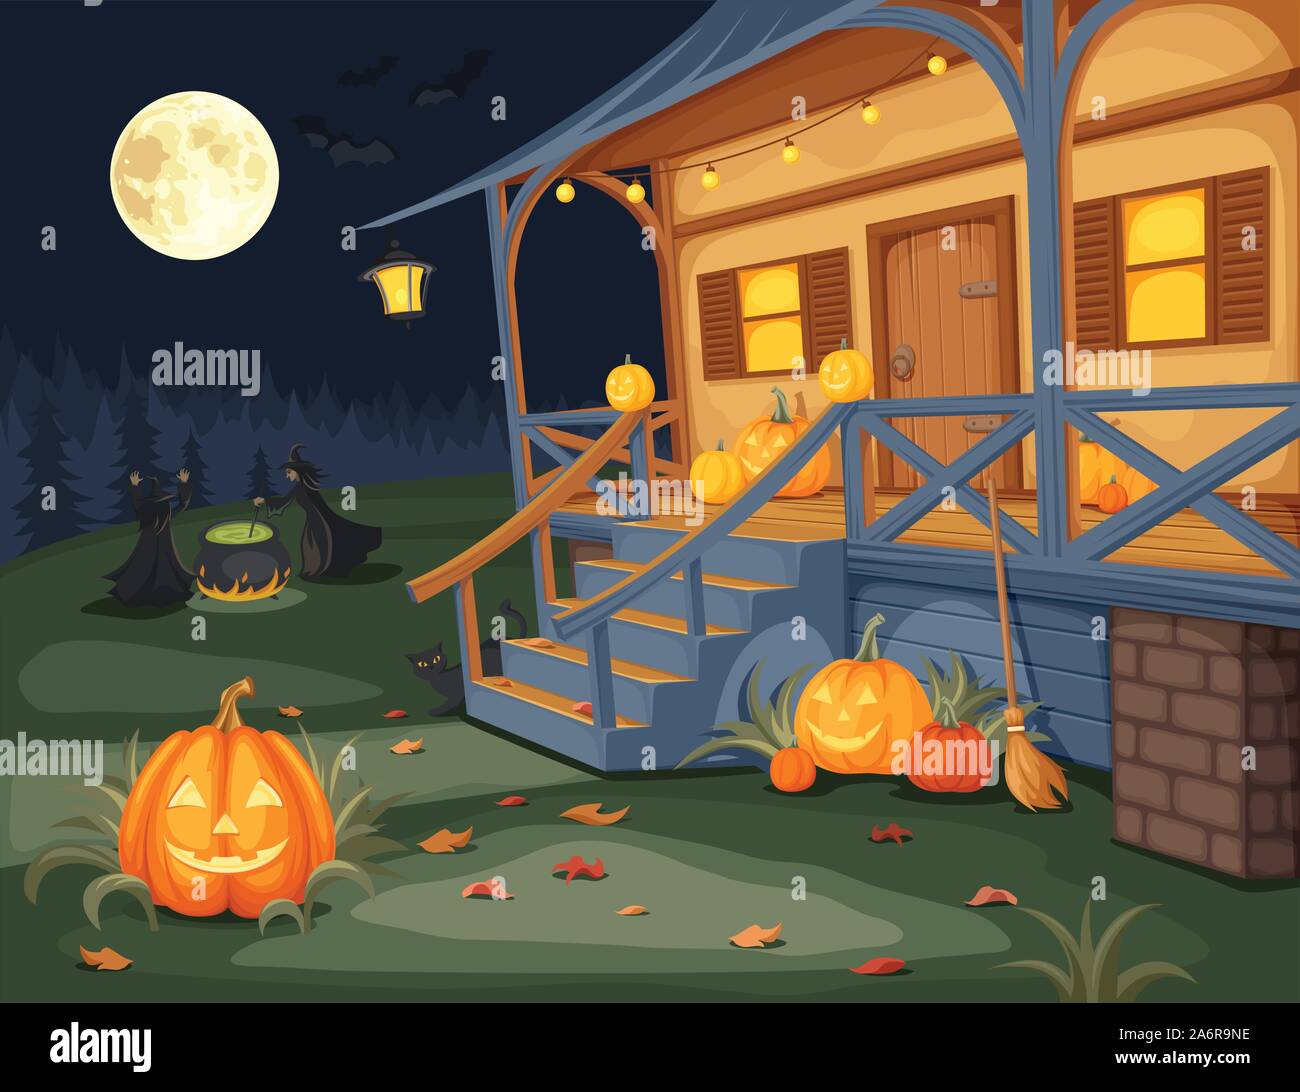 Vector illustration of a Halloween night, house with jack-o-lanterns on a terrace and witches brewing a potion under a full moon. Stock Vector